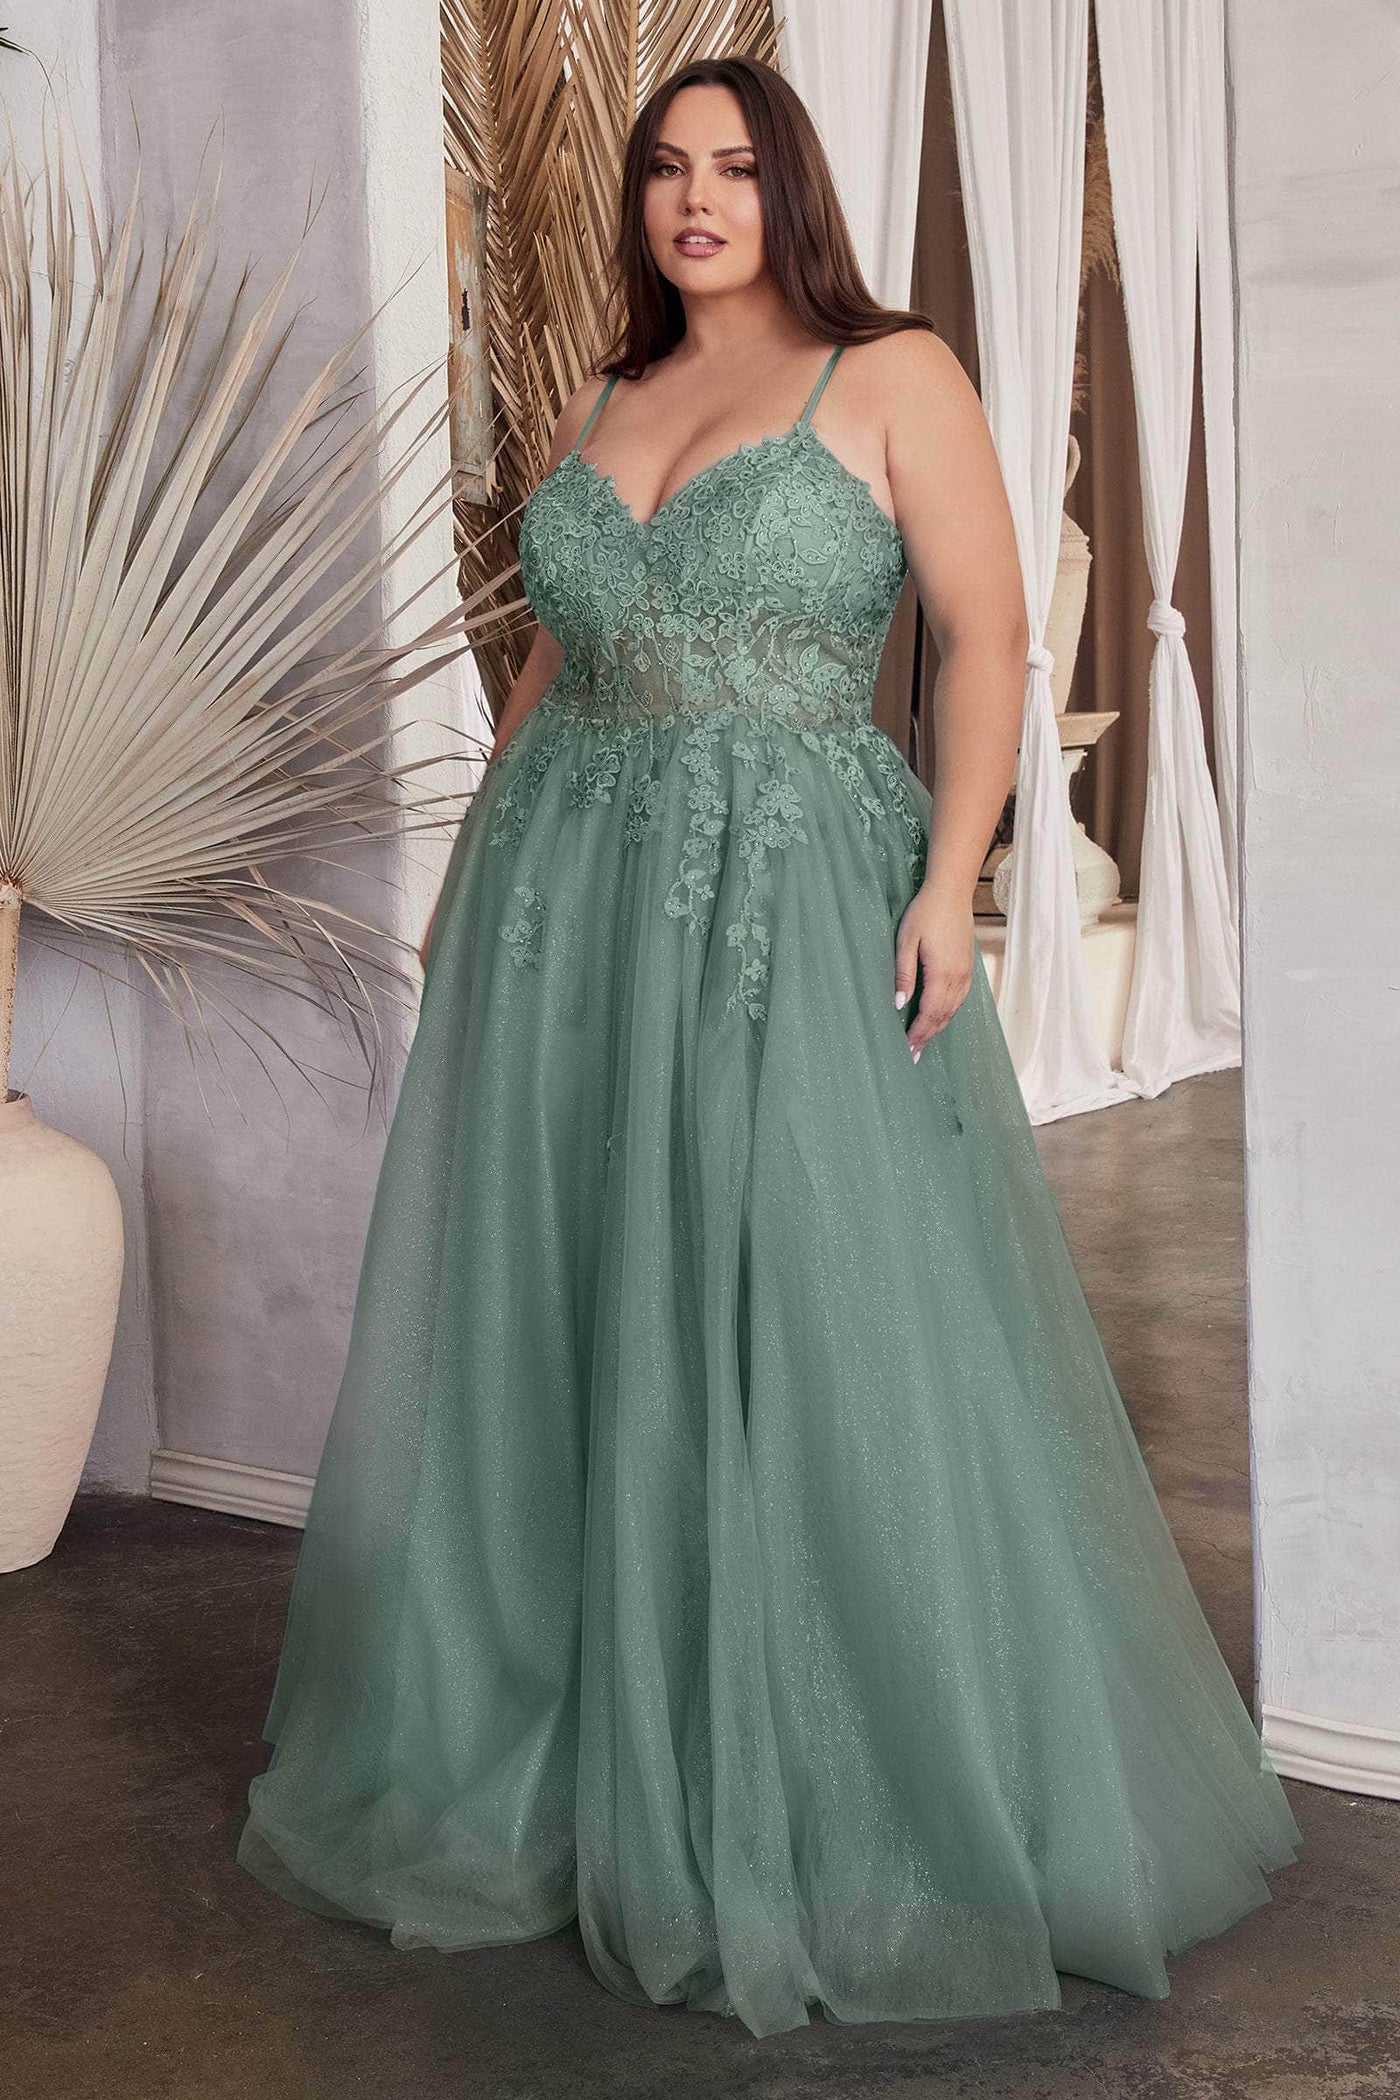 Ladivine C148C - Embroidered Sleeveless Gown Special Occasion Dress